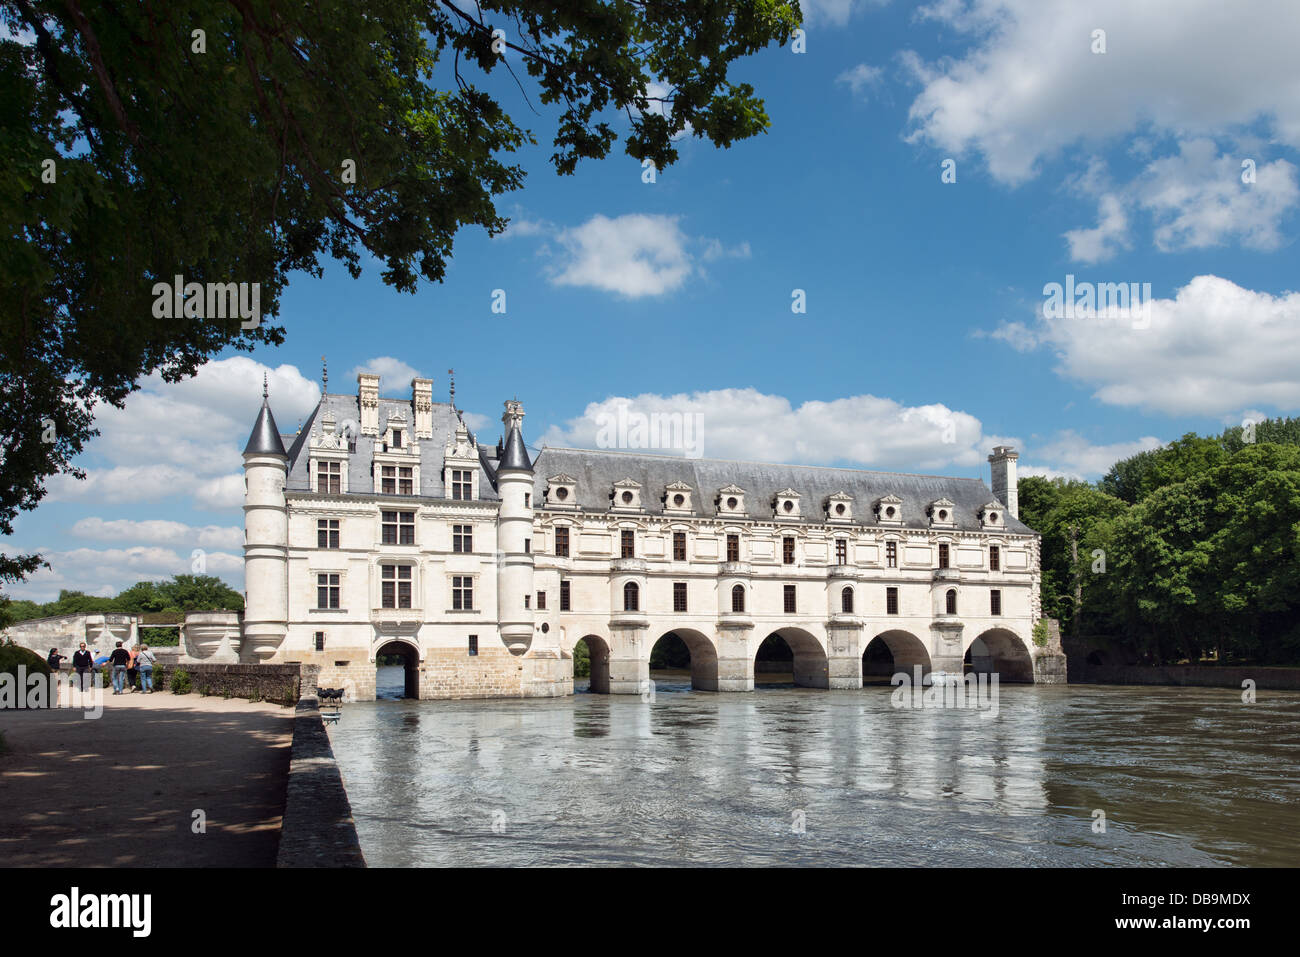 A landscape view of Château Chenonceau in the Loire valley, France showing the  main building spanning the river Stock Photo